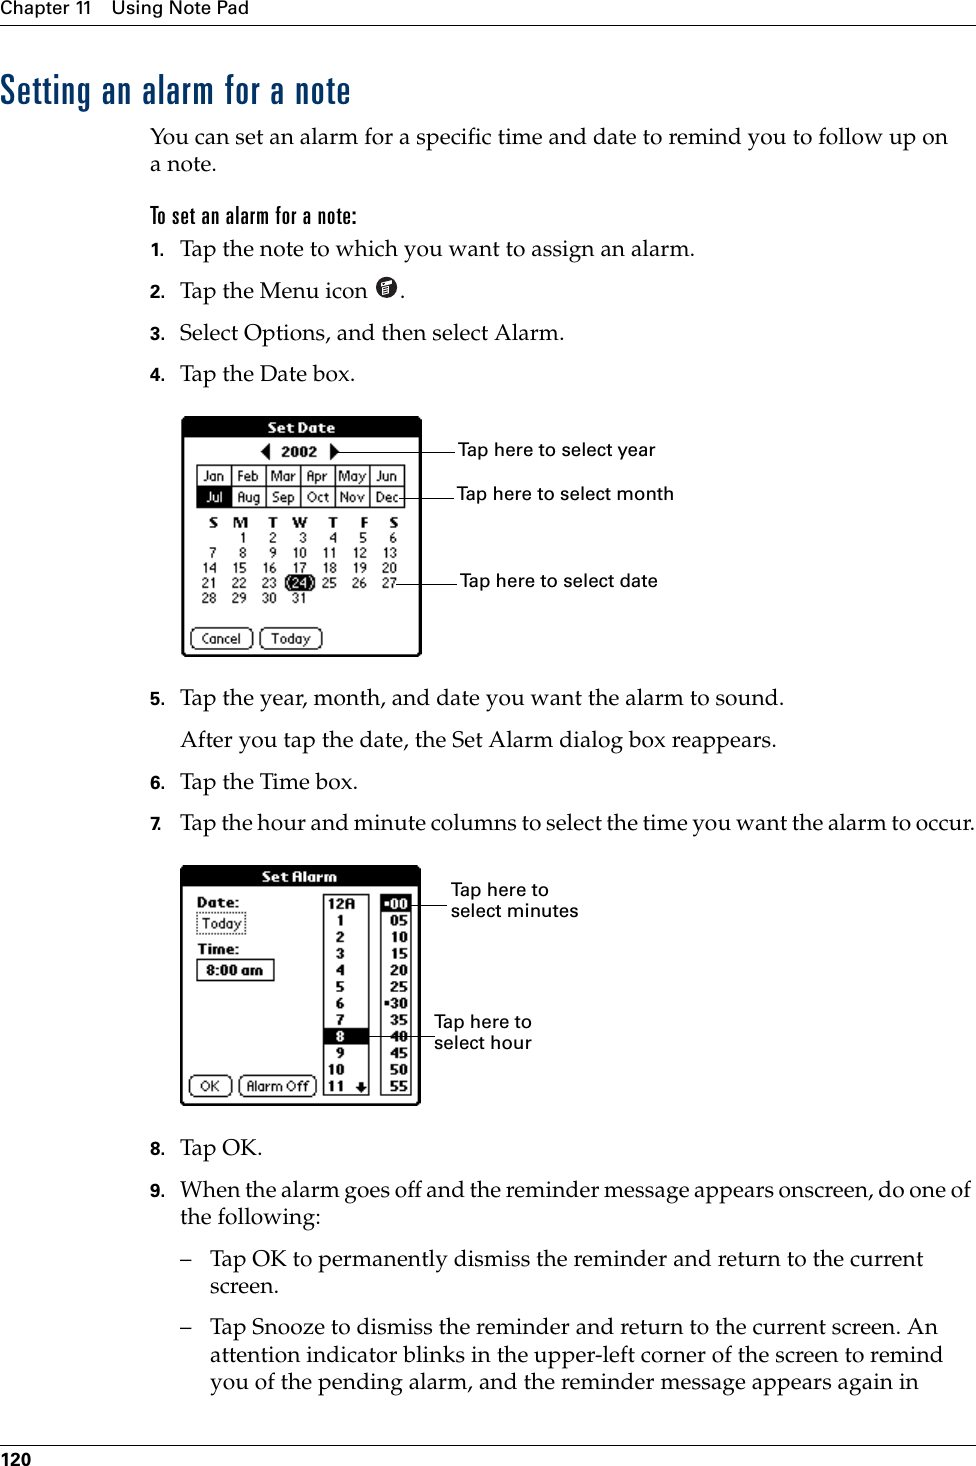 Chapter 11 Using Note Pad120Setting an alarm for a noteYou can set an alarm for a specific time and date to remind you to follow up on anote.To set an alarm for a note:1. Tap the note to which you want to assign an alarm.2. Tap the Menu icon  . 3. Select Options, and then select Alarm.4. Tap the Date box.5. Tap the year, month, and date you want the alarm to sound.After you tap the date, the Set Alarm dialog box reappears.6. Tap the Time box.7. Tap the hour and minute columns to select the time you want the alarm to occur.8. Tap OK.9. When the alarm goes off and the reminder message appears onscreen, do one of the following:– Tap OK to permanently dismiss the reminder and return to the current screen.– Tap Snooze to dismiss the reminder and return to the current screen. An attention indicator blinks in the upper-left corner of the screen to remind you of the pending alarm, and the reminder message appears again in Tap here to select monthTap here to select yearTap here to select dateTap here to select minutesTap here to select hourPalm, Inc. Confidential